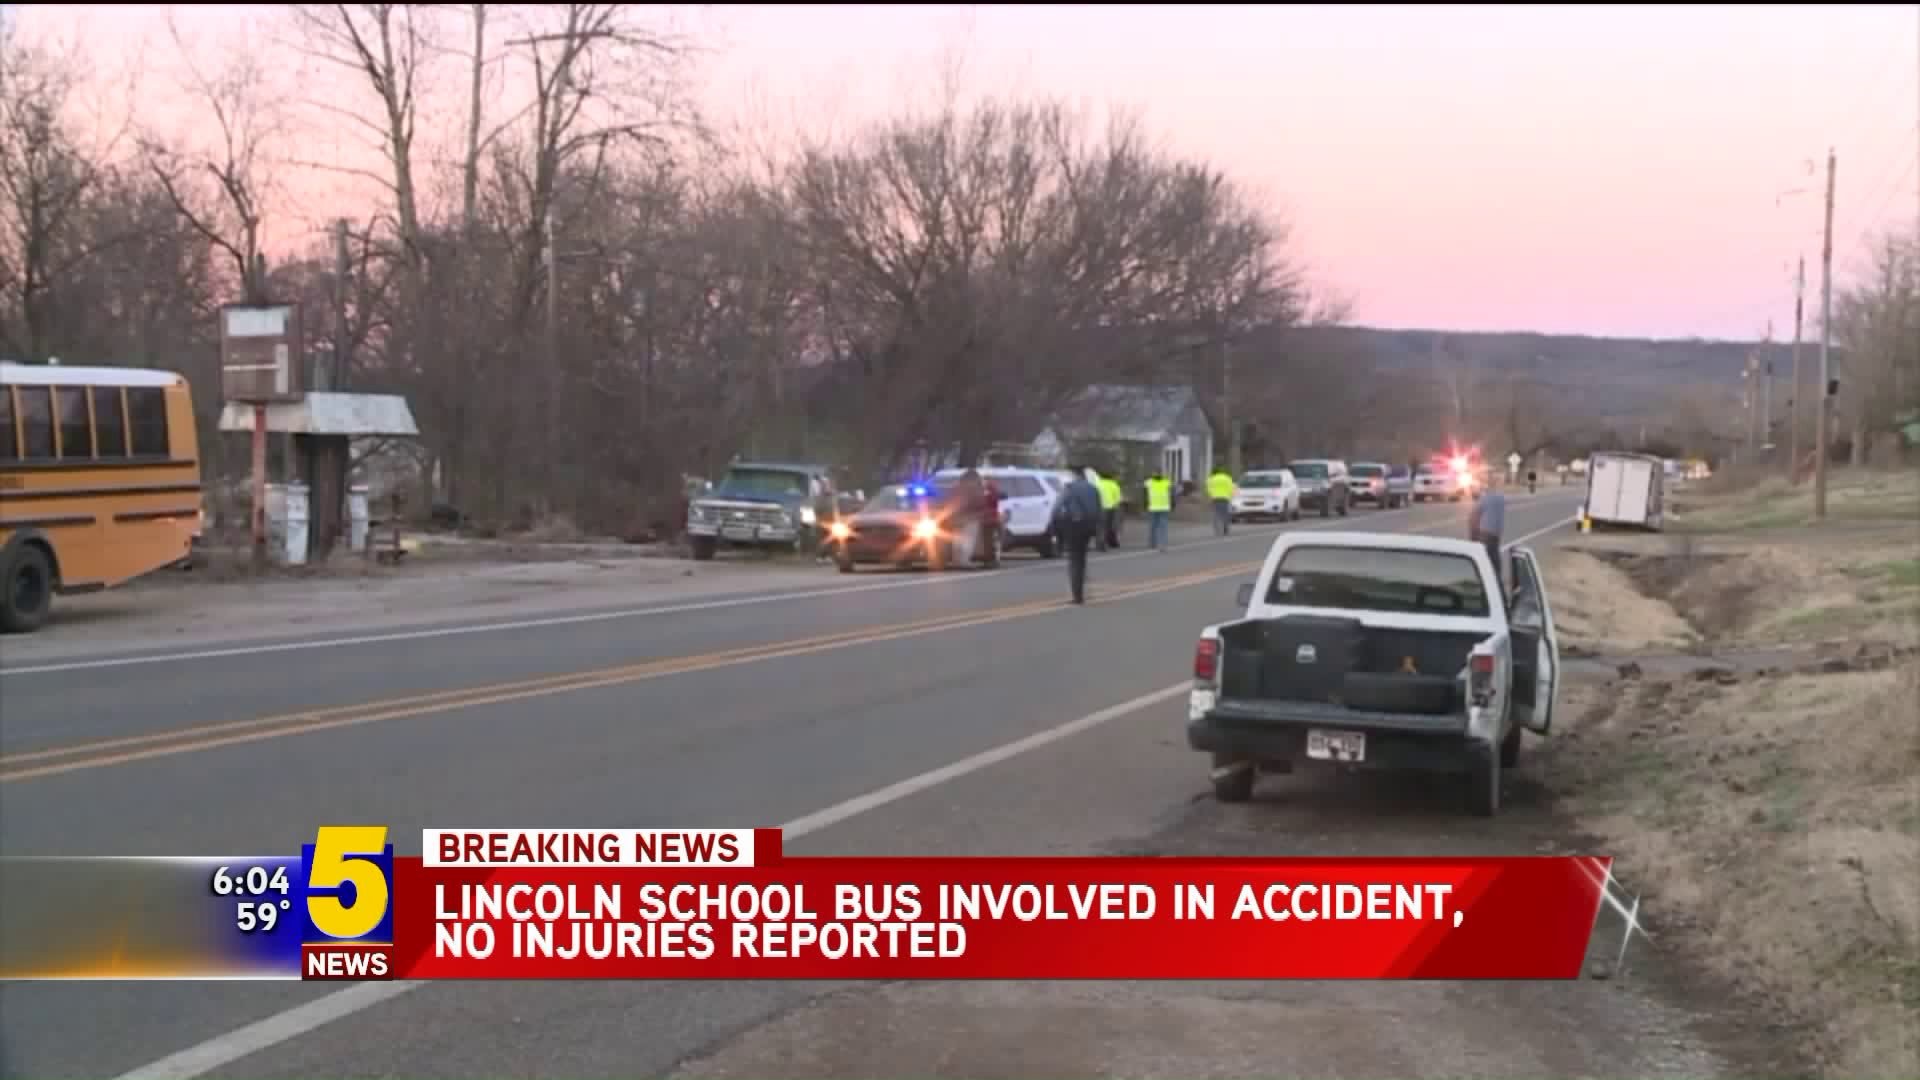 Lincoln School Bus involved in accident, no injuries reported